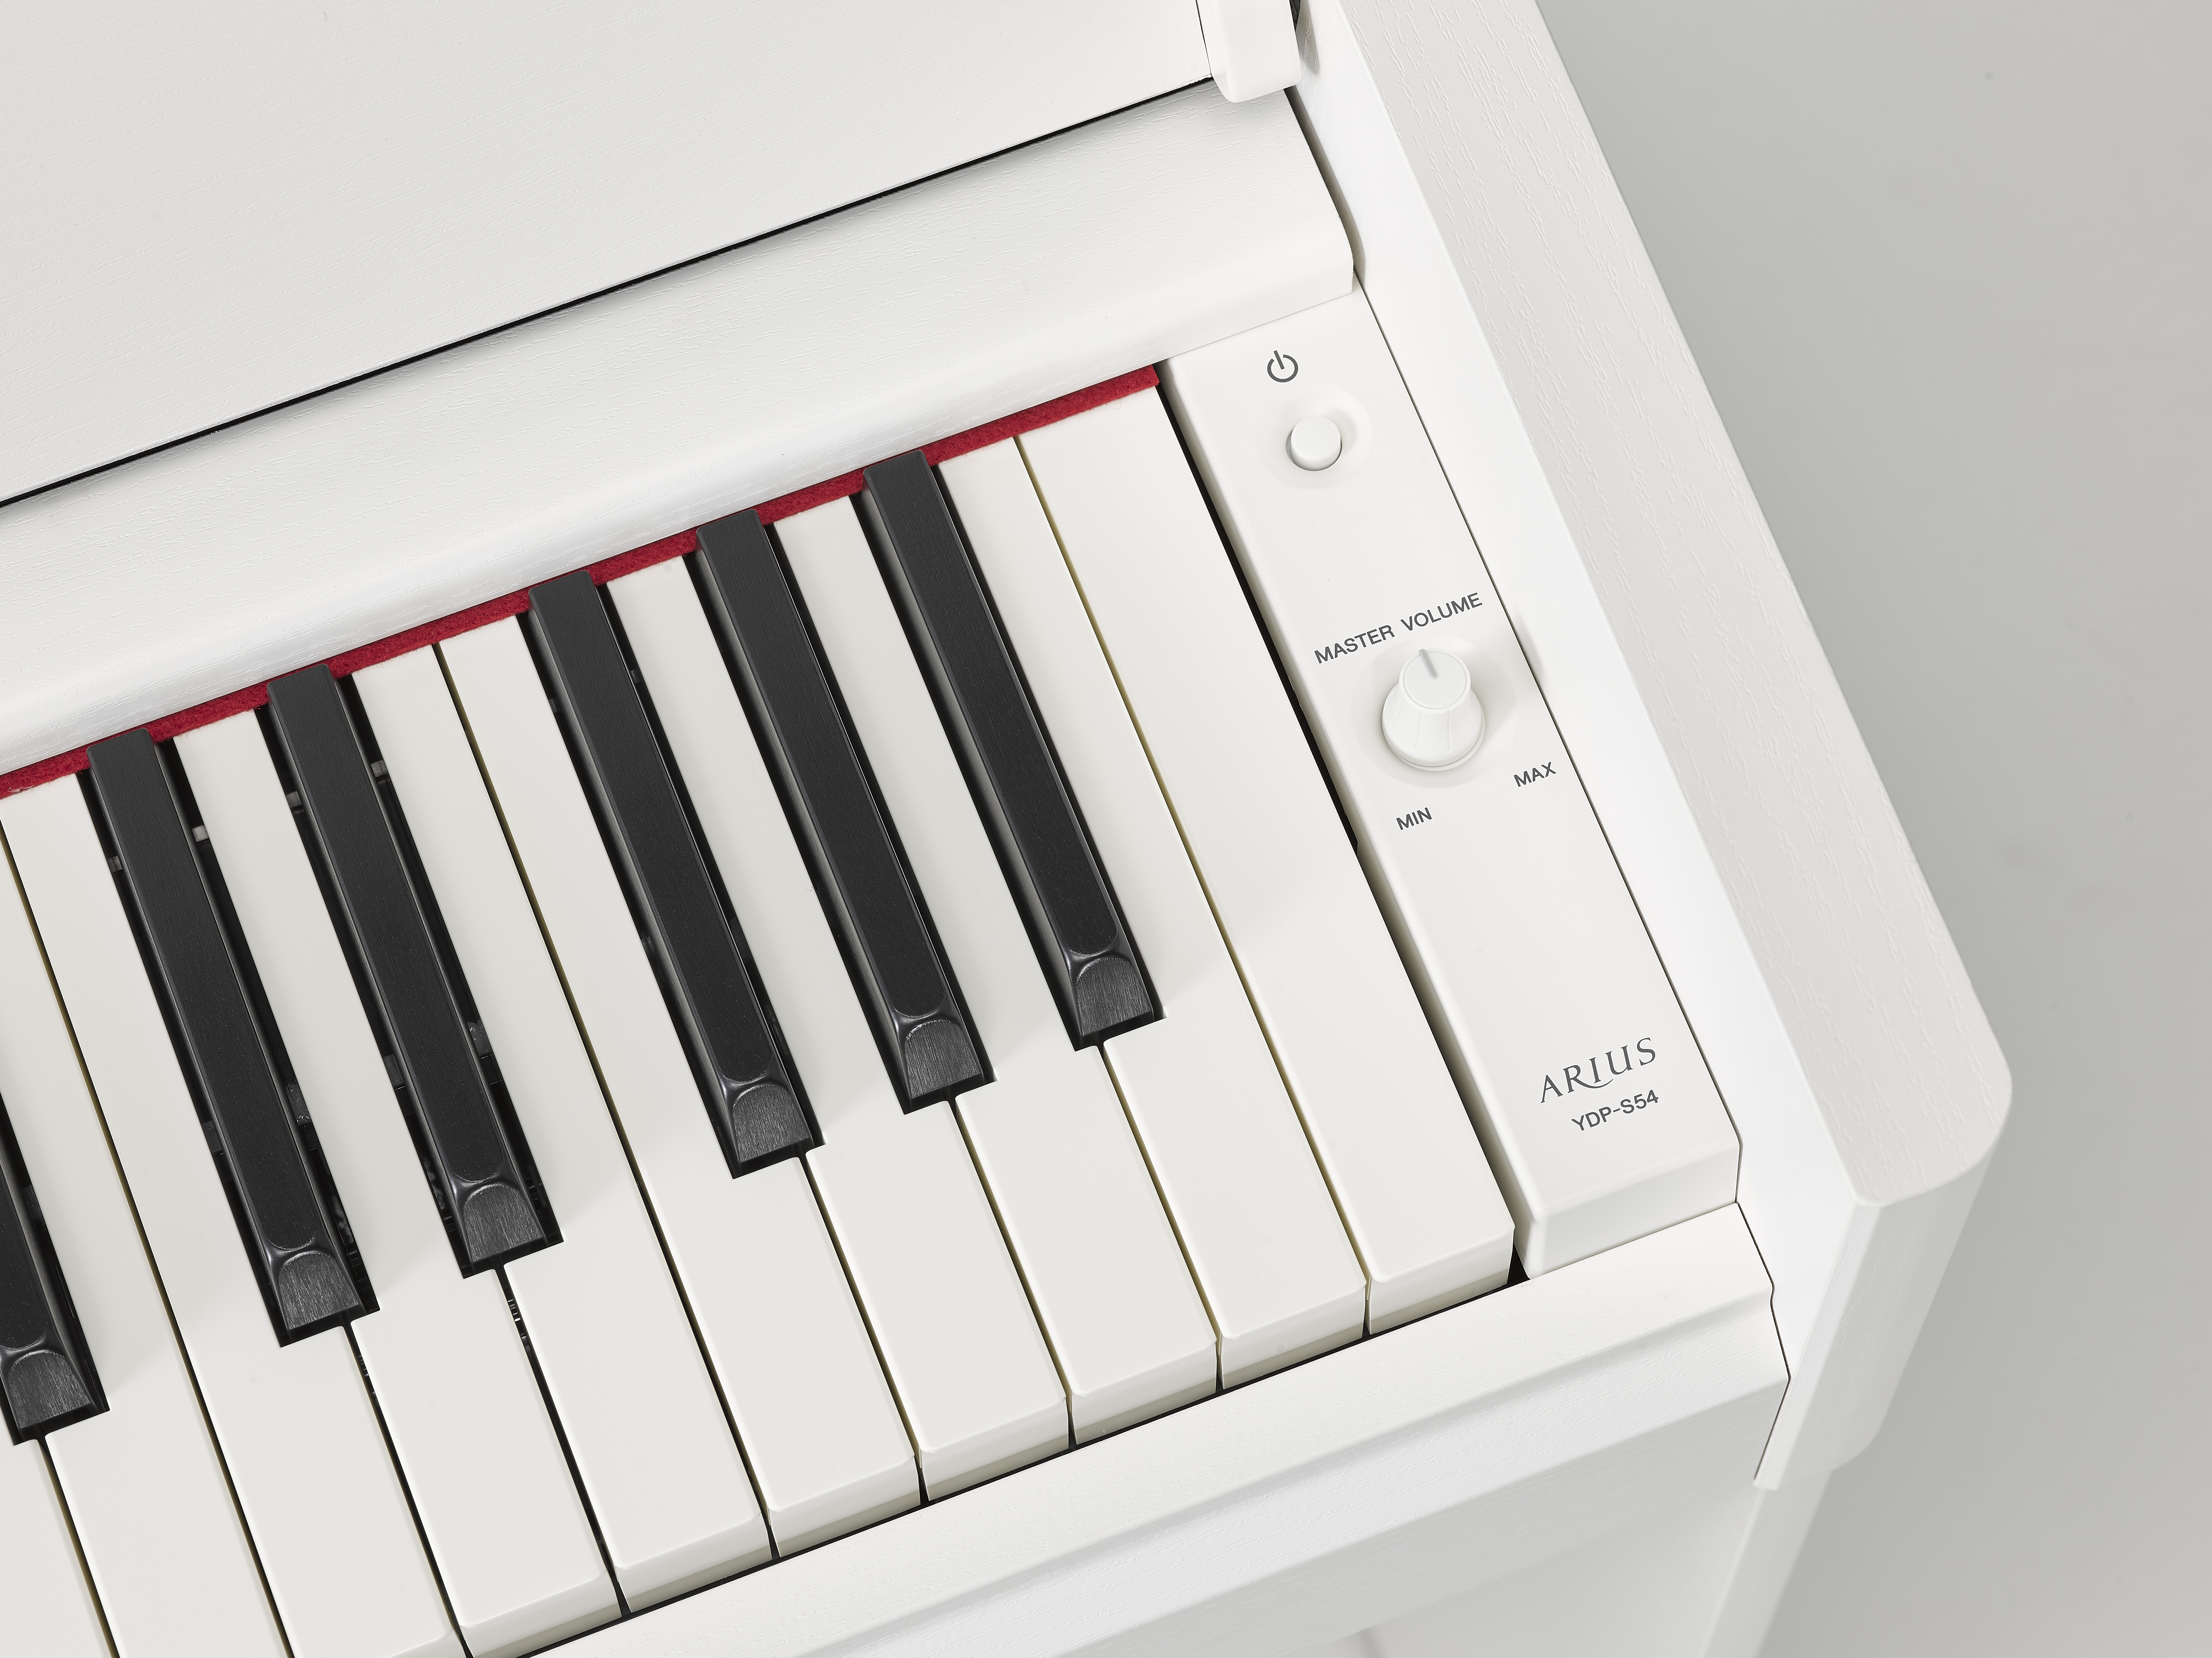 Yamaha Ydp-s54 - White - Digital piano with stand - Variation 5